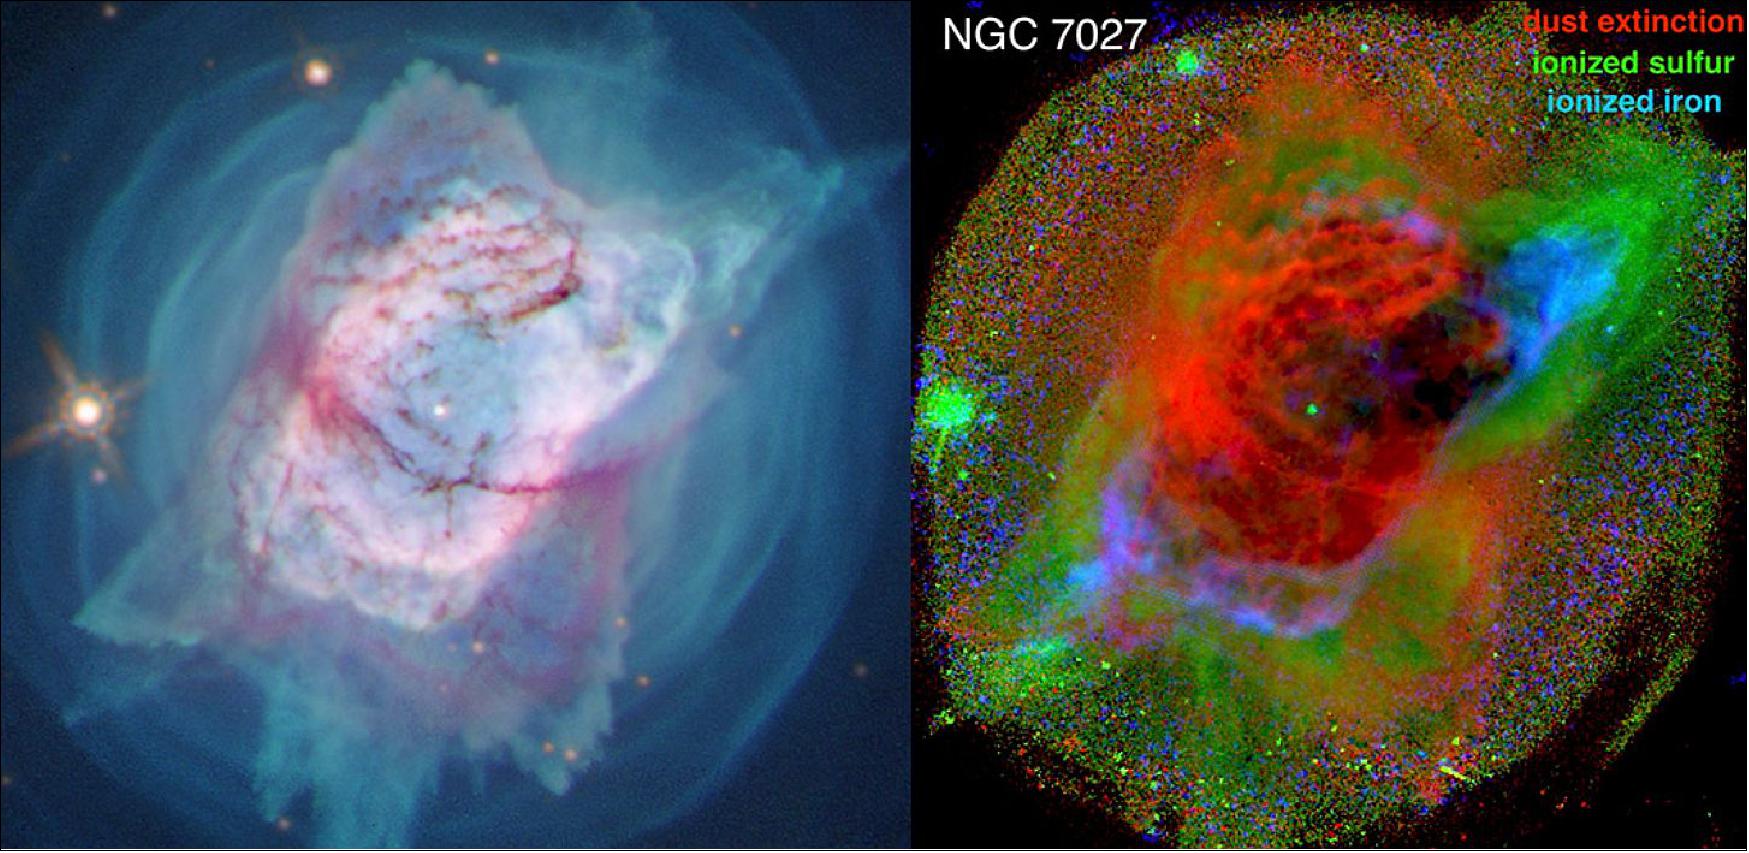 Figure 121: On the left is an image of the Jewel Bug Nebula (NGC 7027) captured by the Hubble Space Telescope in 2019 and released in 2020. Further analysis by researchers produced the RGB image on the right, which shows extinction due to dust, as inferred from the relative strength of two hydrogen emission lines, as red; emission from sulfur, relative to hydrogen, as green; and emission from iron as blue (image credit: STScI, Alyssa Pagan; P. Moraga (RIT) et al.)